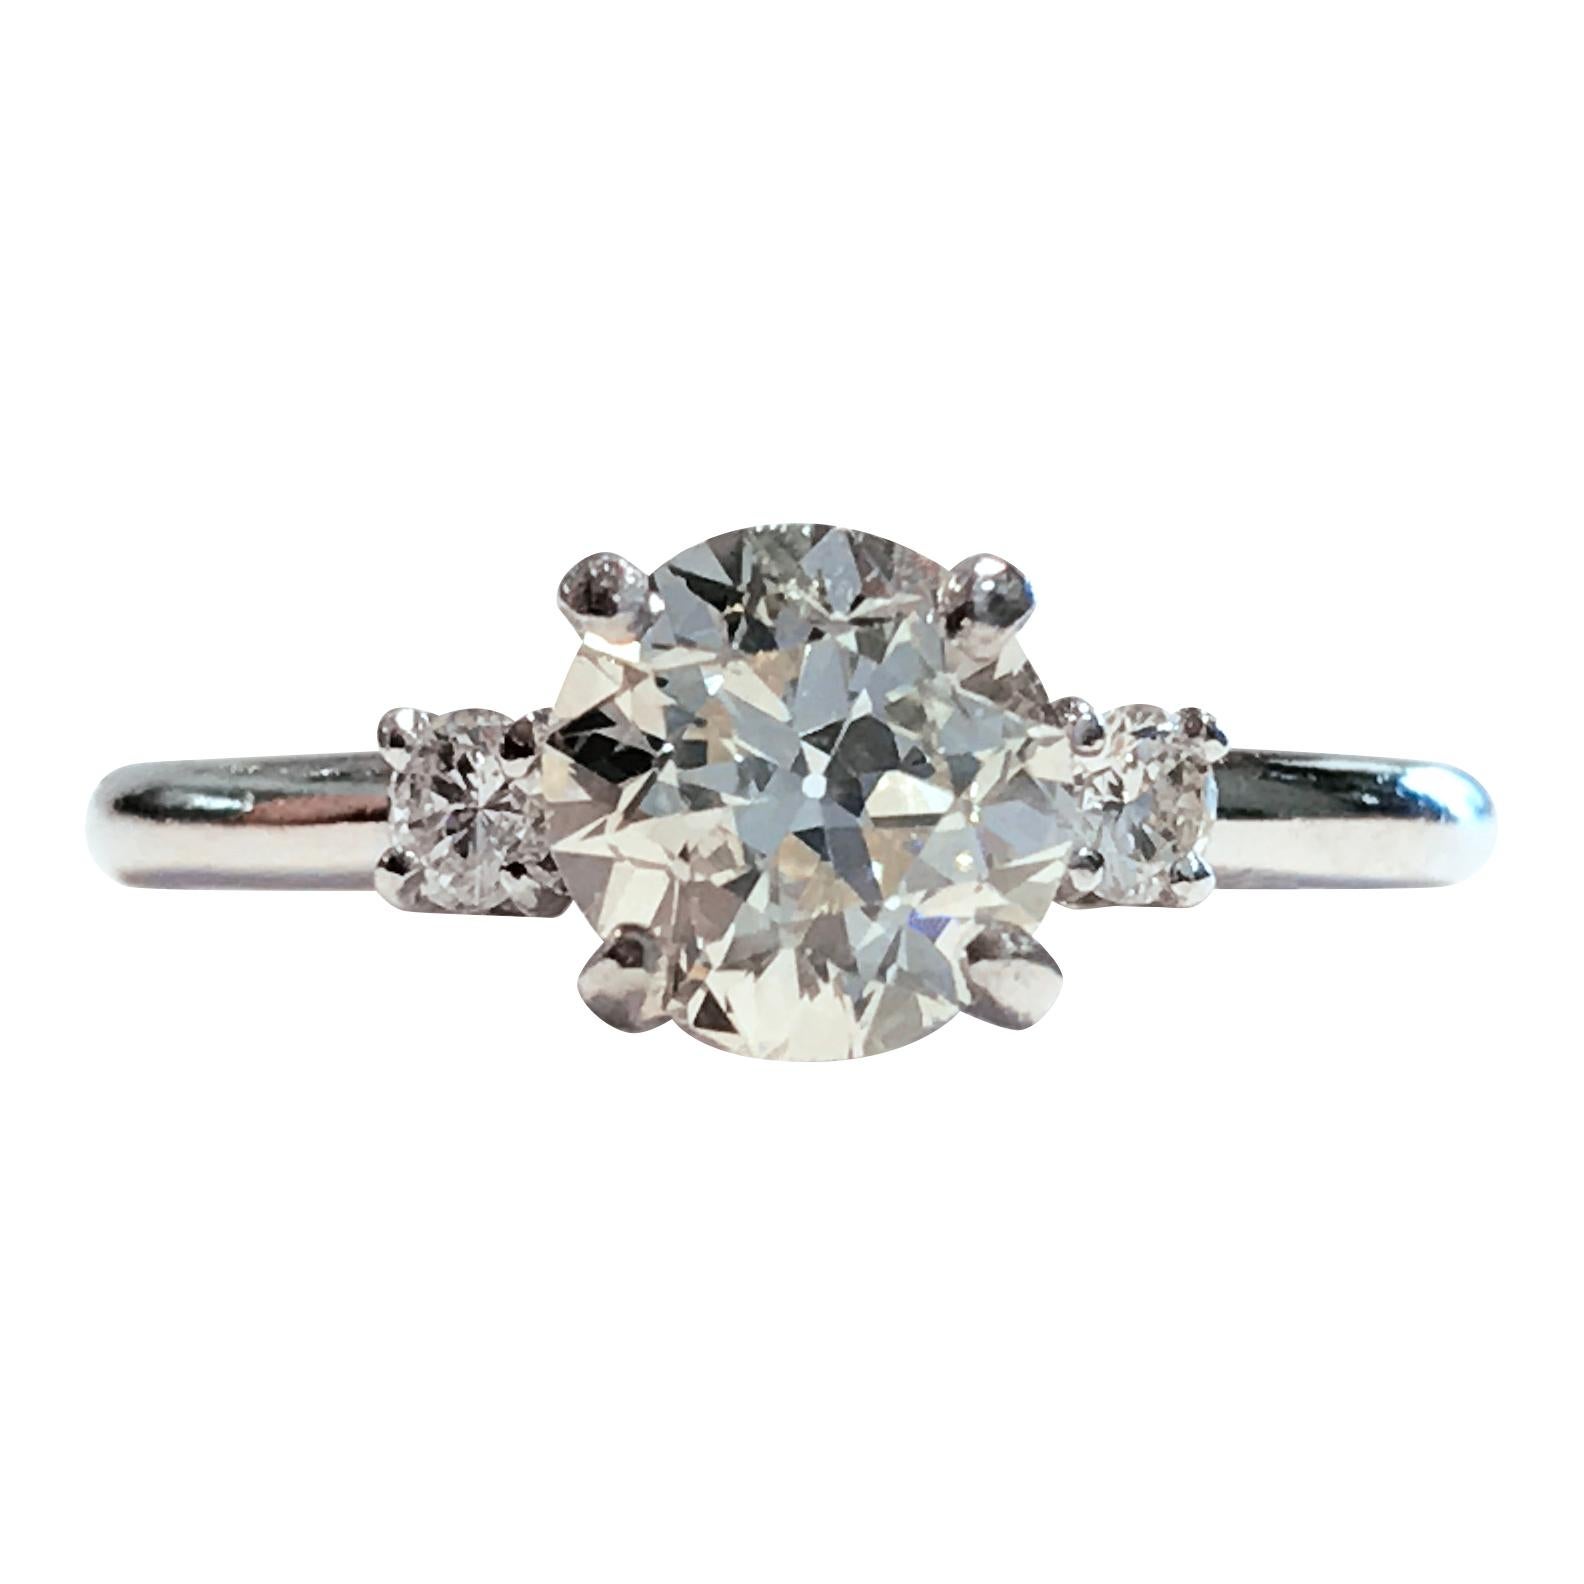 Vintage Platinum Three-Diamond Engagement Ring. Old Mine-cut Center Diamond, four-prong set. Center Diamond is SI1 in clarity (G.I.A.) and M-L in color (G.I.A.) measuring 6.28 x 6.33mm for a carat weight of 0.87ct. Two round side diamonds measure